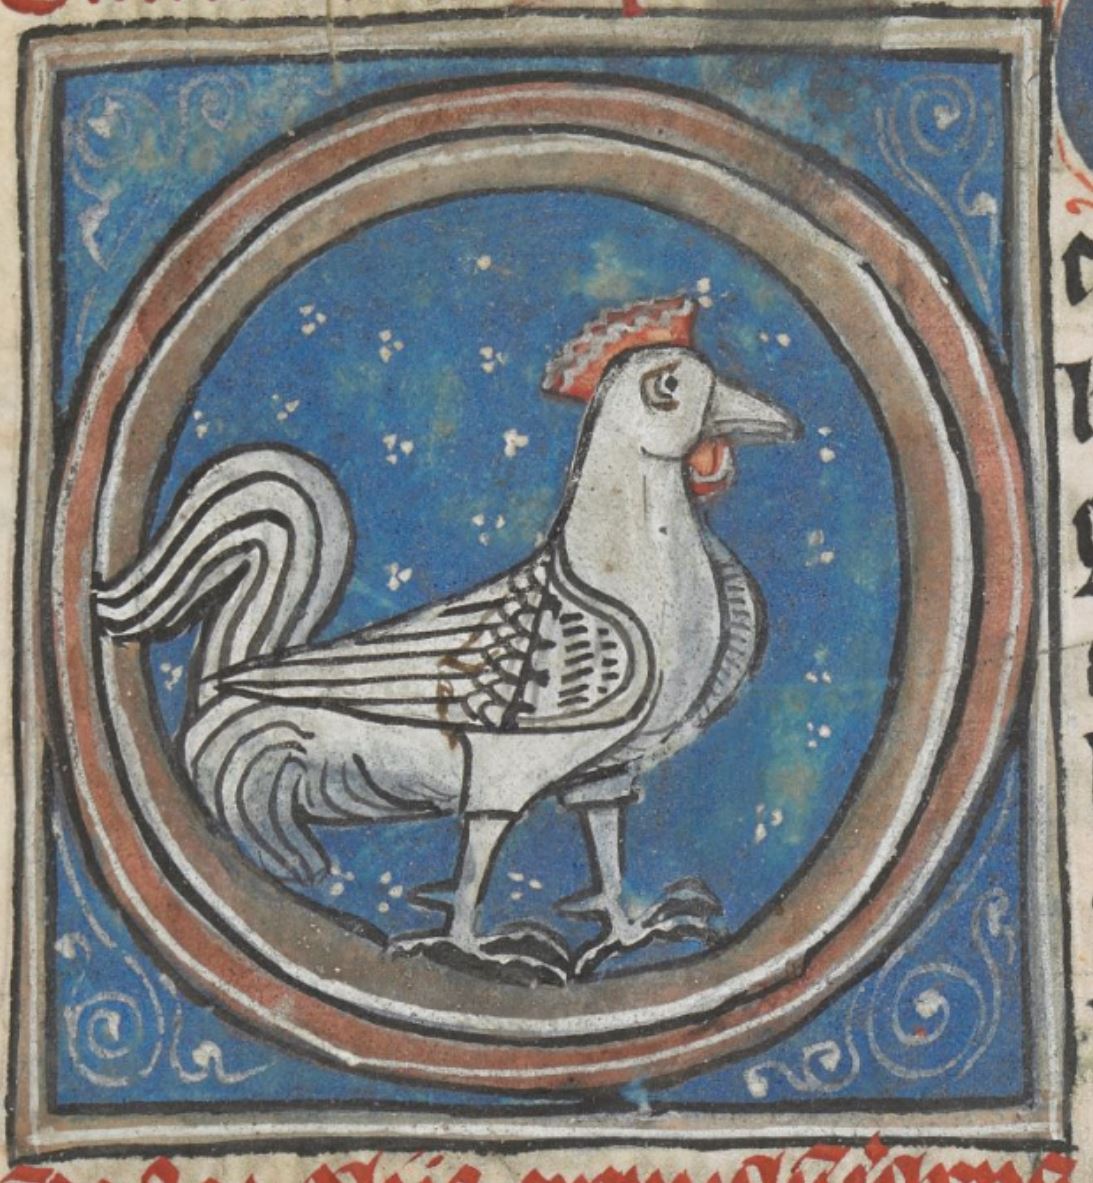 A white rooster (cock)